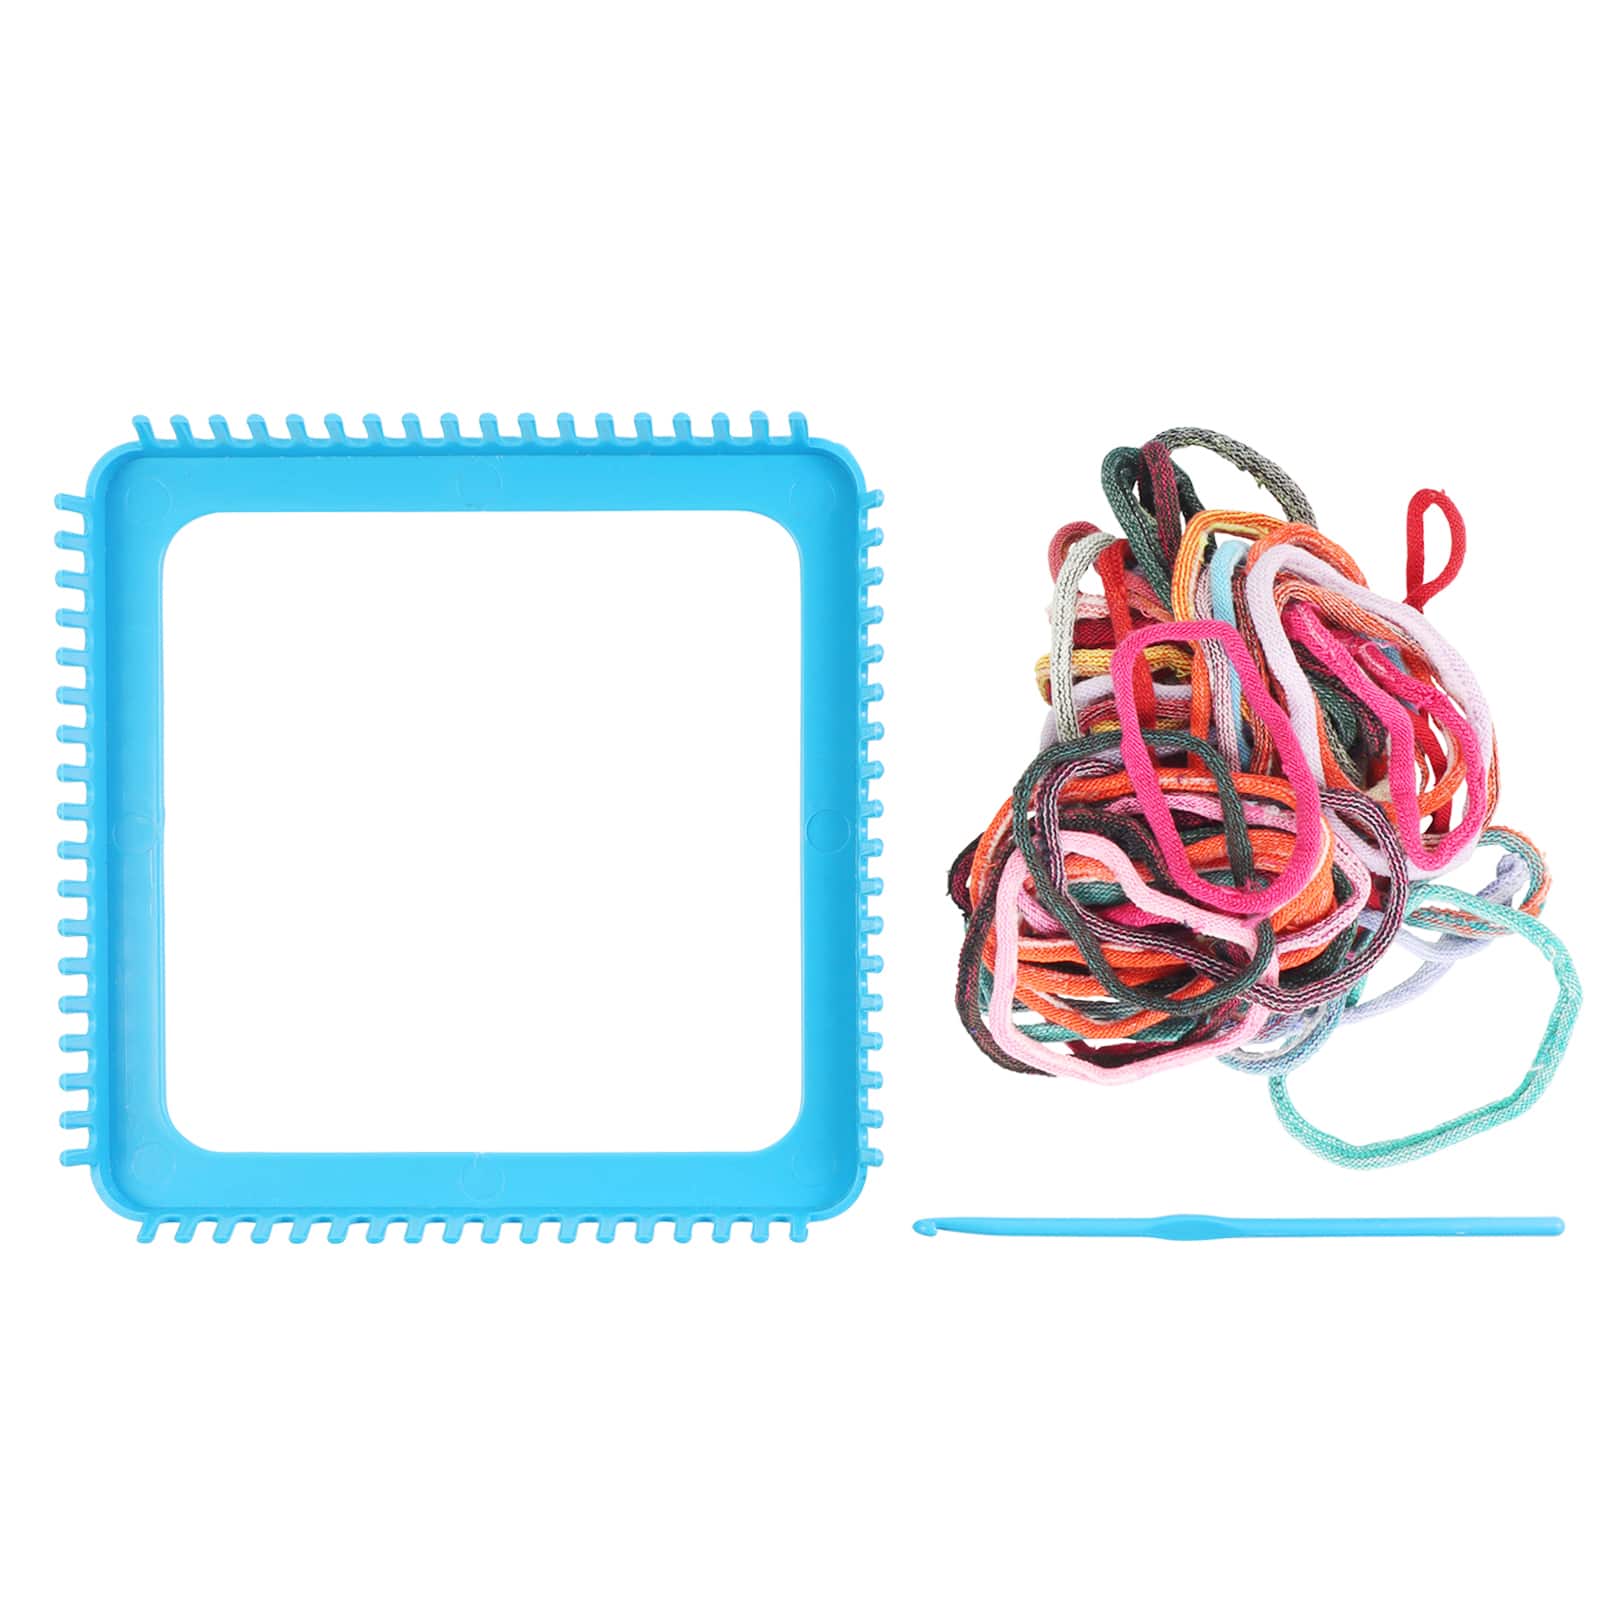 DDAI Weaving Loom for Kids - Arts and Crafts for Girls Ages 6-8-12 Potholder Loops Toys for Girls and Adults - Knitting Loom Set Pot Holder Weaving